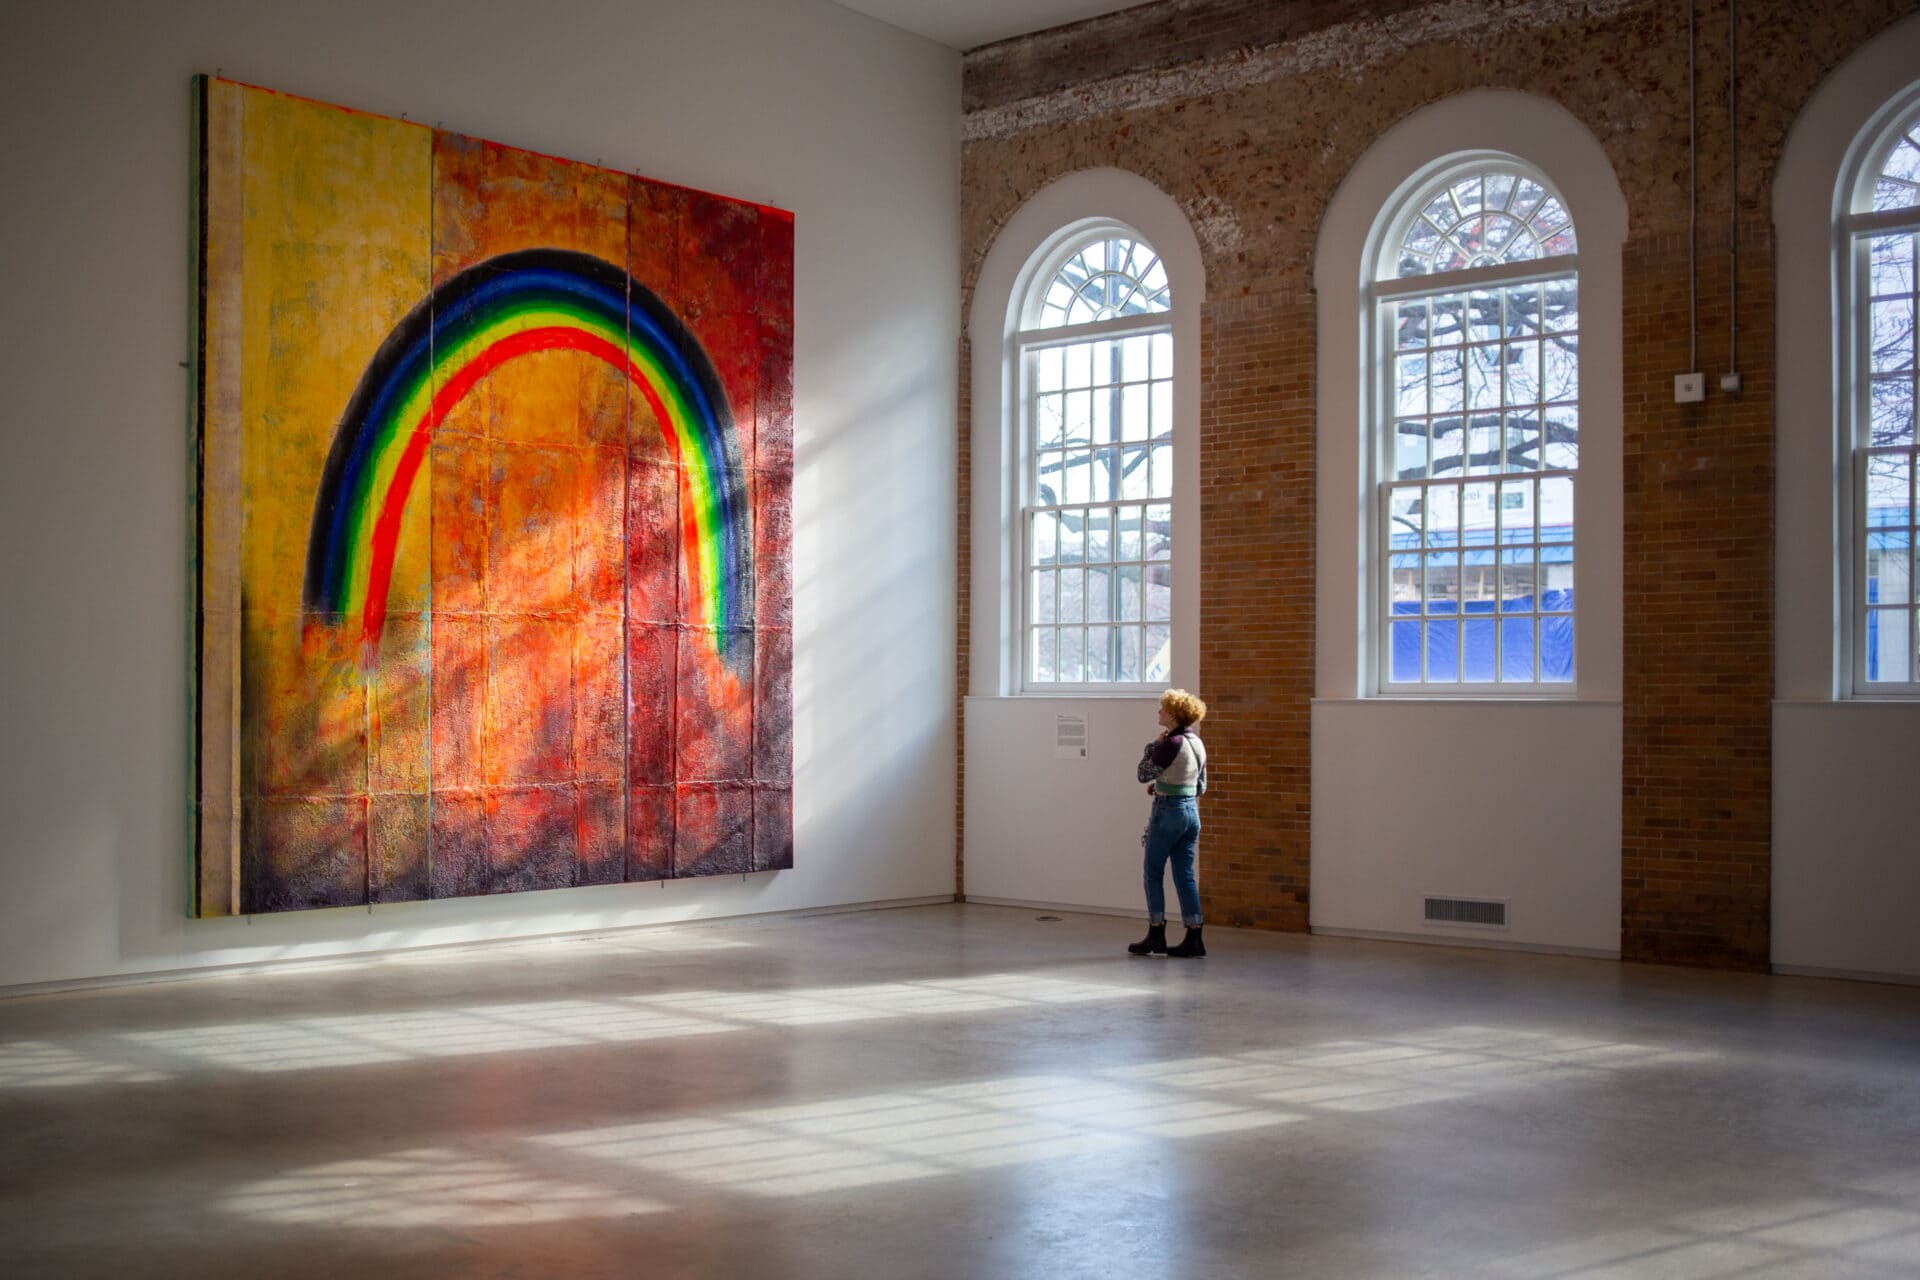 a person stands in a large art gallery looking at a painting of a rainbow while sunlight streams in through the arched windows